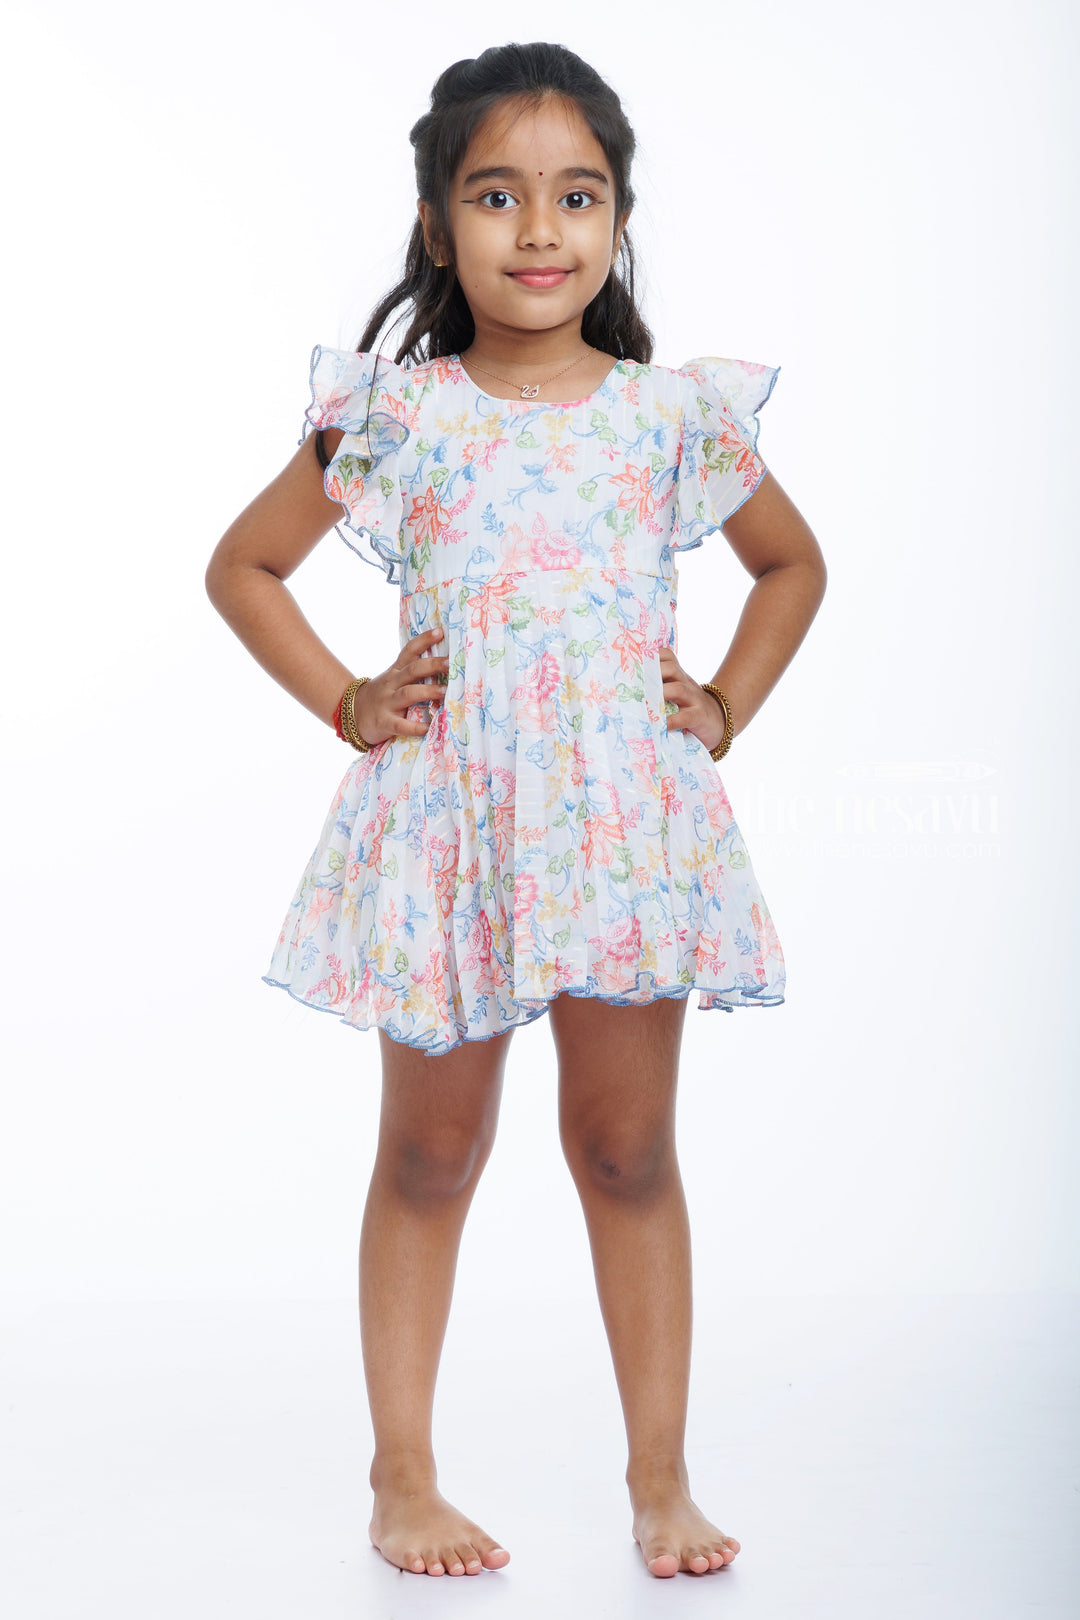 The Nesavu Baby Fancy Frock Toddler Girl's Summer Floral Frock with Ruffled Sleeves Nesavu 16 (1Y) / Orange / Georgette BFJ540A-16 Bright and Beautiful Floral Frock for Toddlers | Perfect for Spring and Summer | The Nesavu